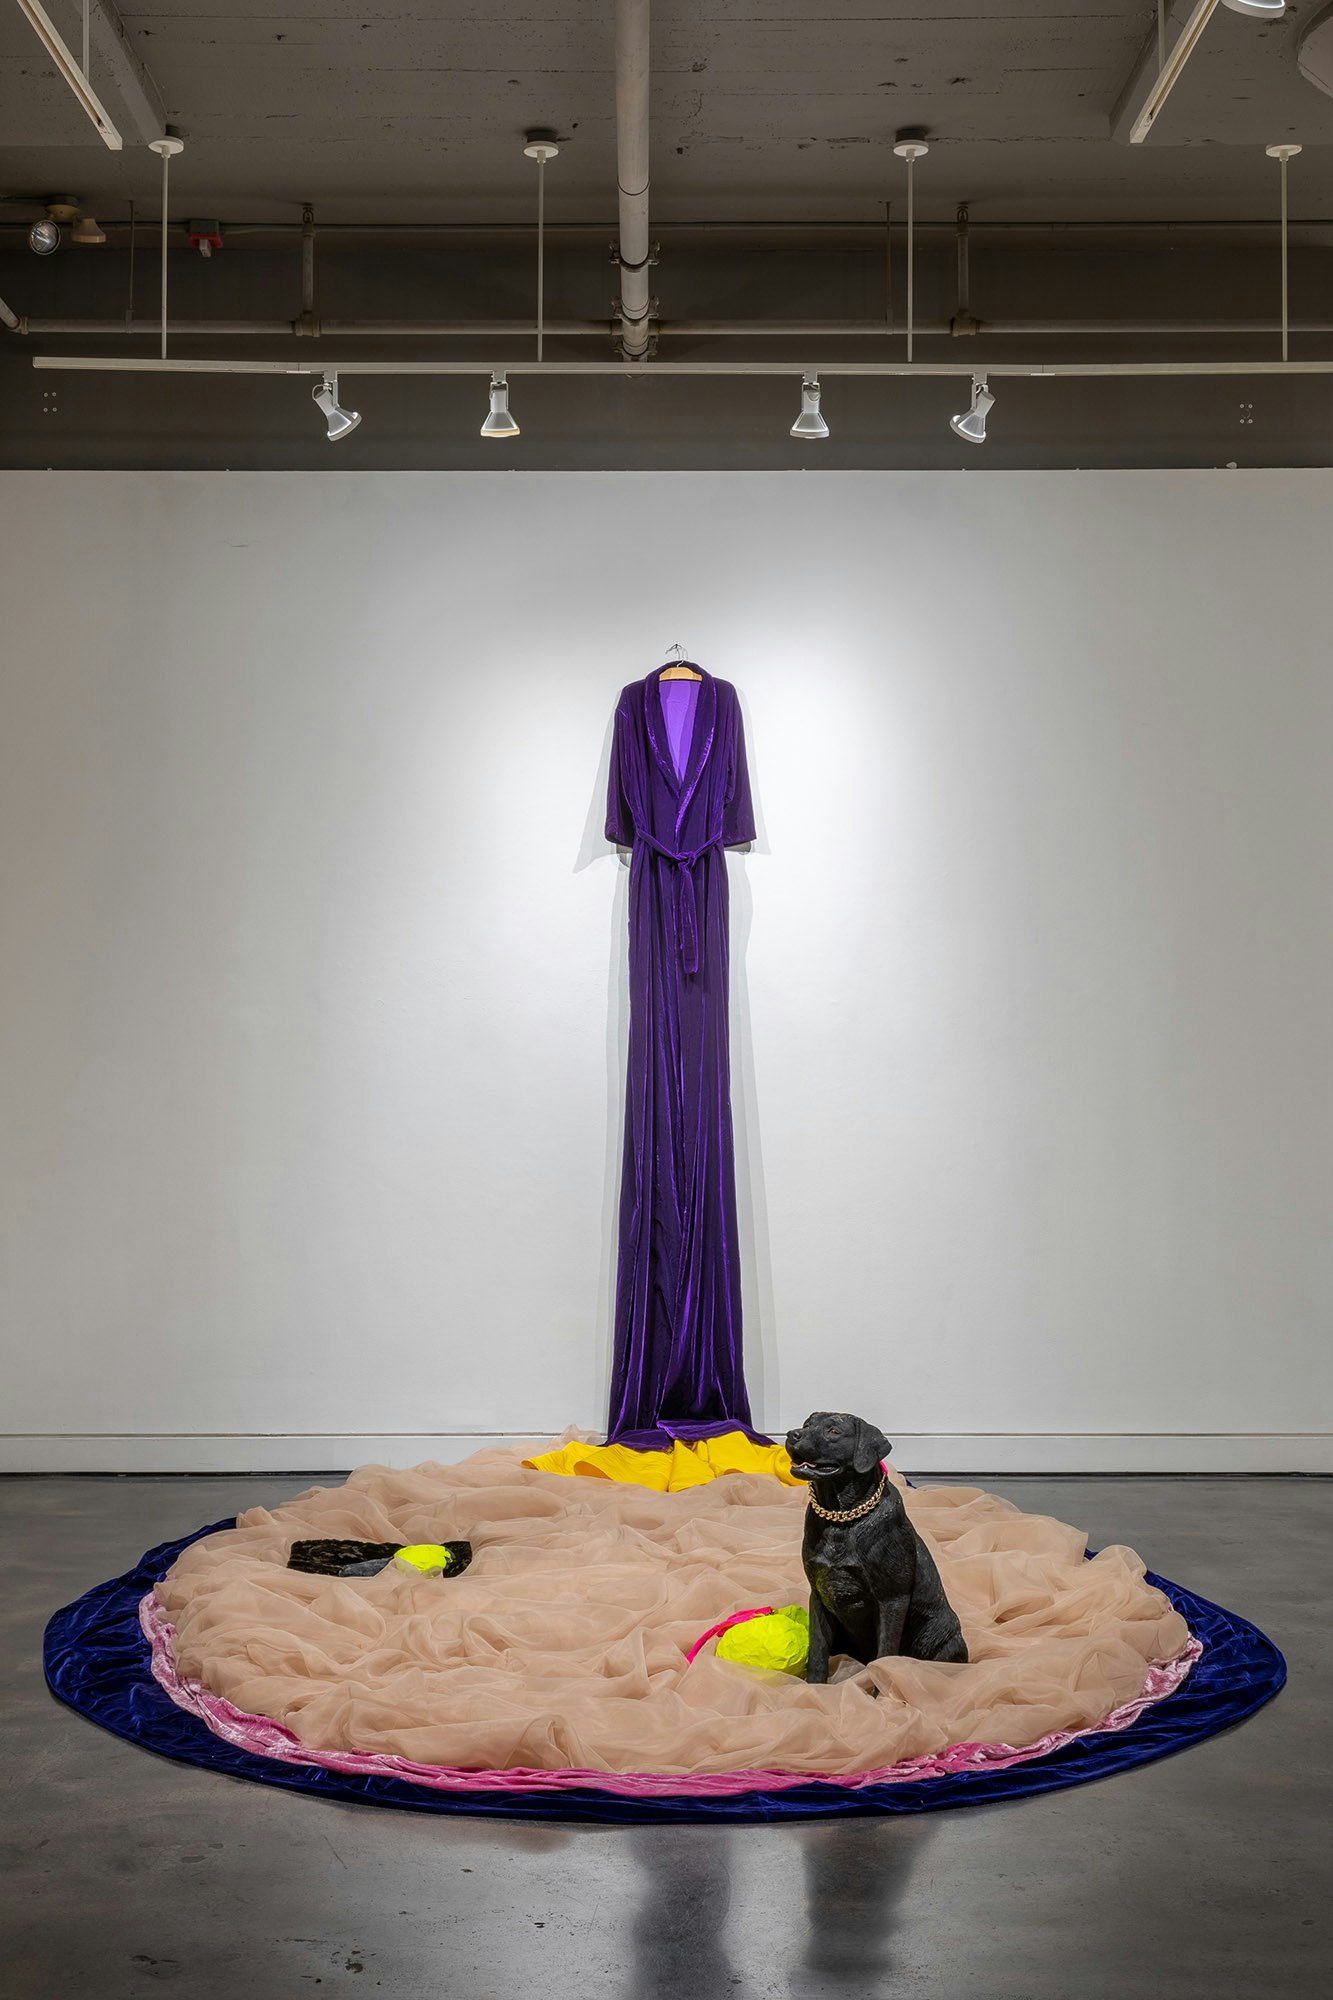 Beverly Semmes, <em>Marigold</em>, 2022. Velvet, organza, faux fur, silk, Alexander McQueen dress, stuffed and taped AMQ clutch purse and strap, taped AMQ shoes, painted plastic resin dog with AMQ clutch purse chain, 118 x 118 x 171 inches. Courtesy Locks Gallery, Philadelphia.